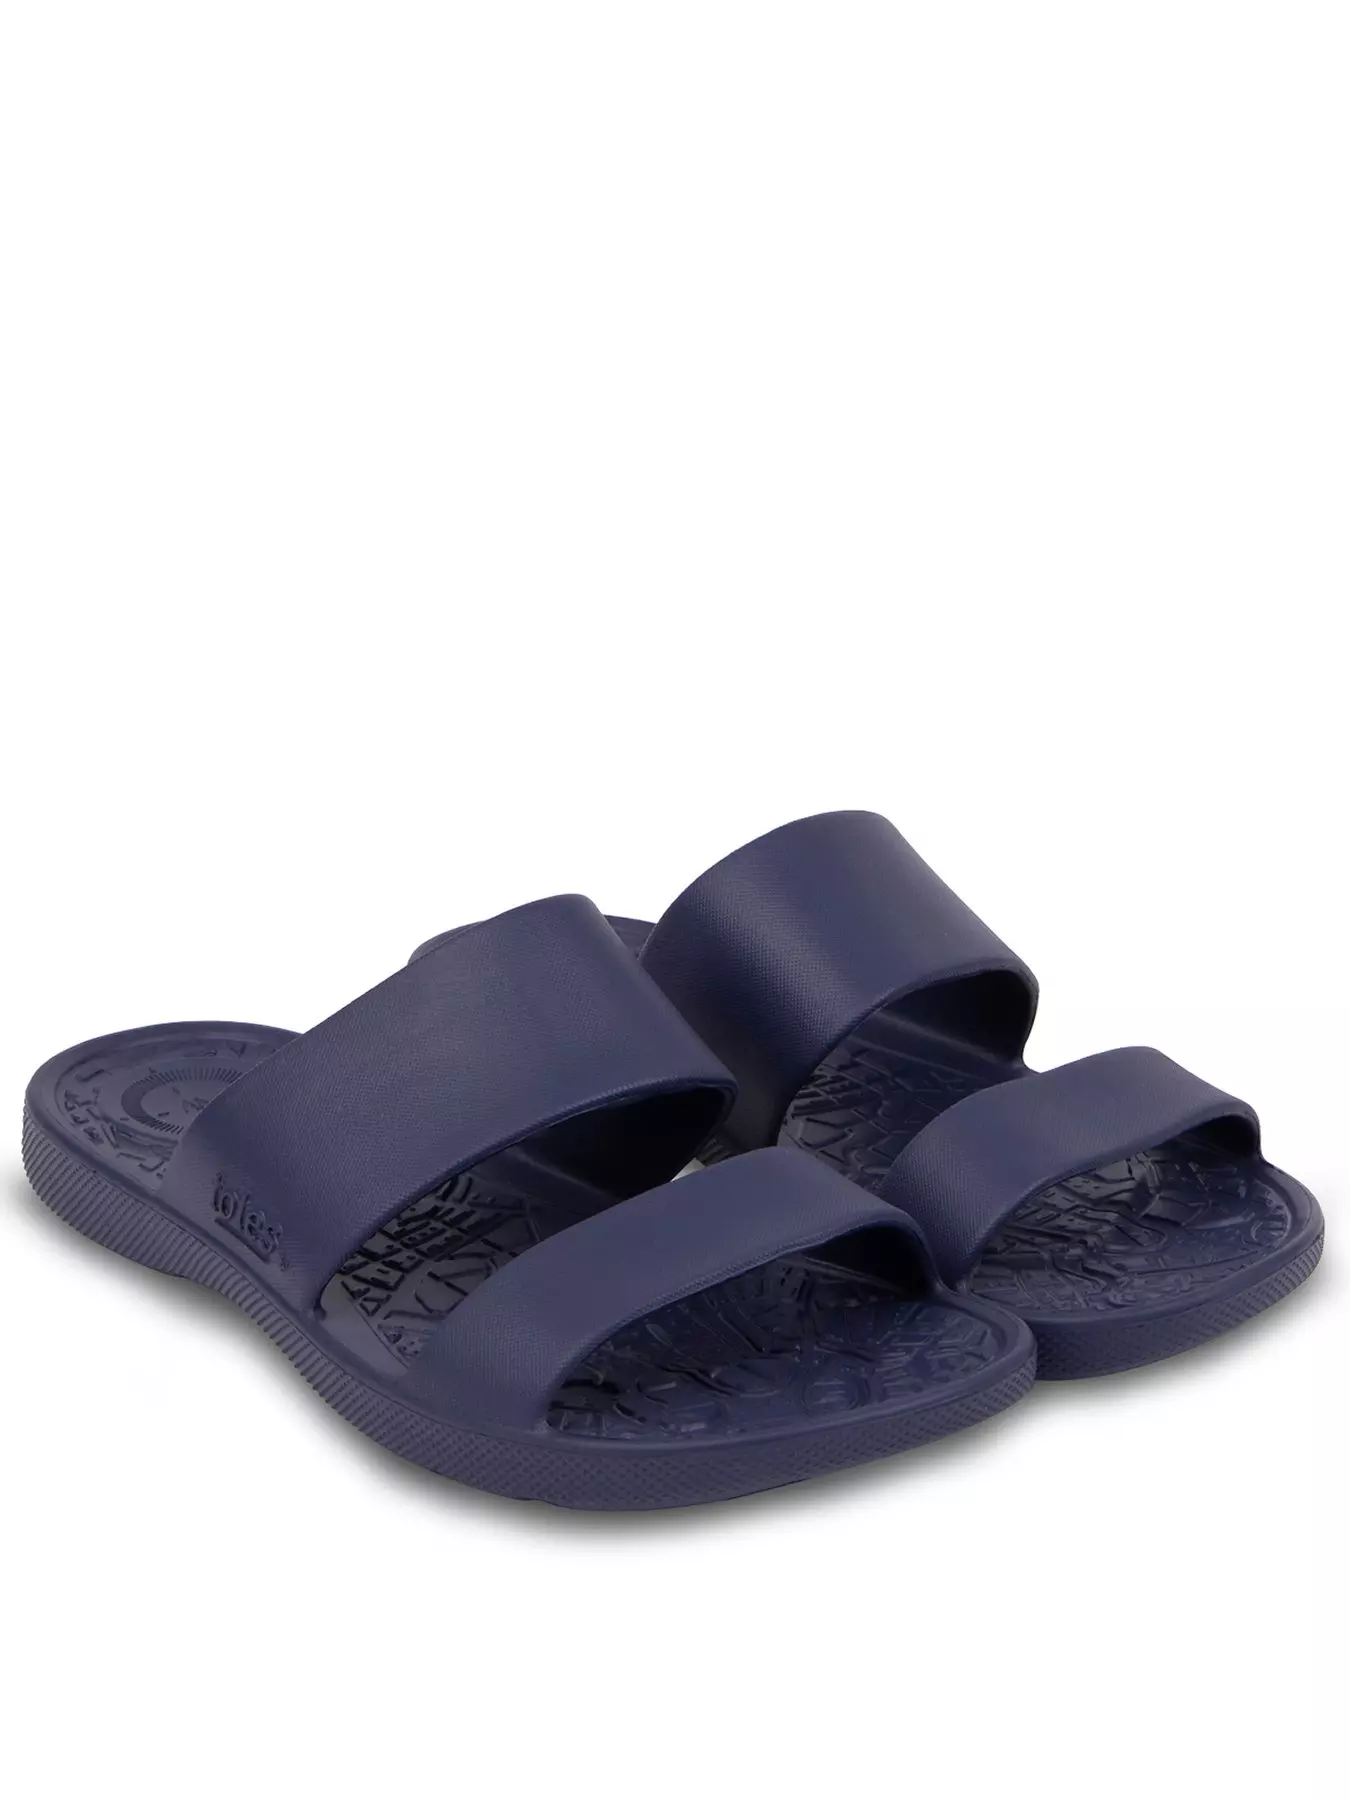 Totes Womens Sol Bounce 2-Strap Sandals - Navy Blue, 11 - Fry's